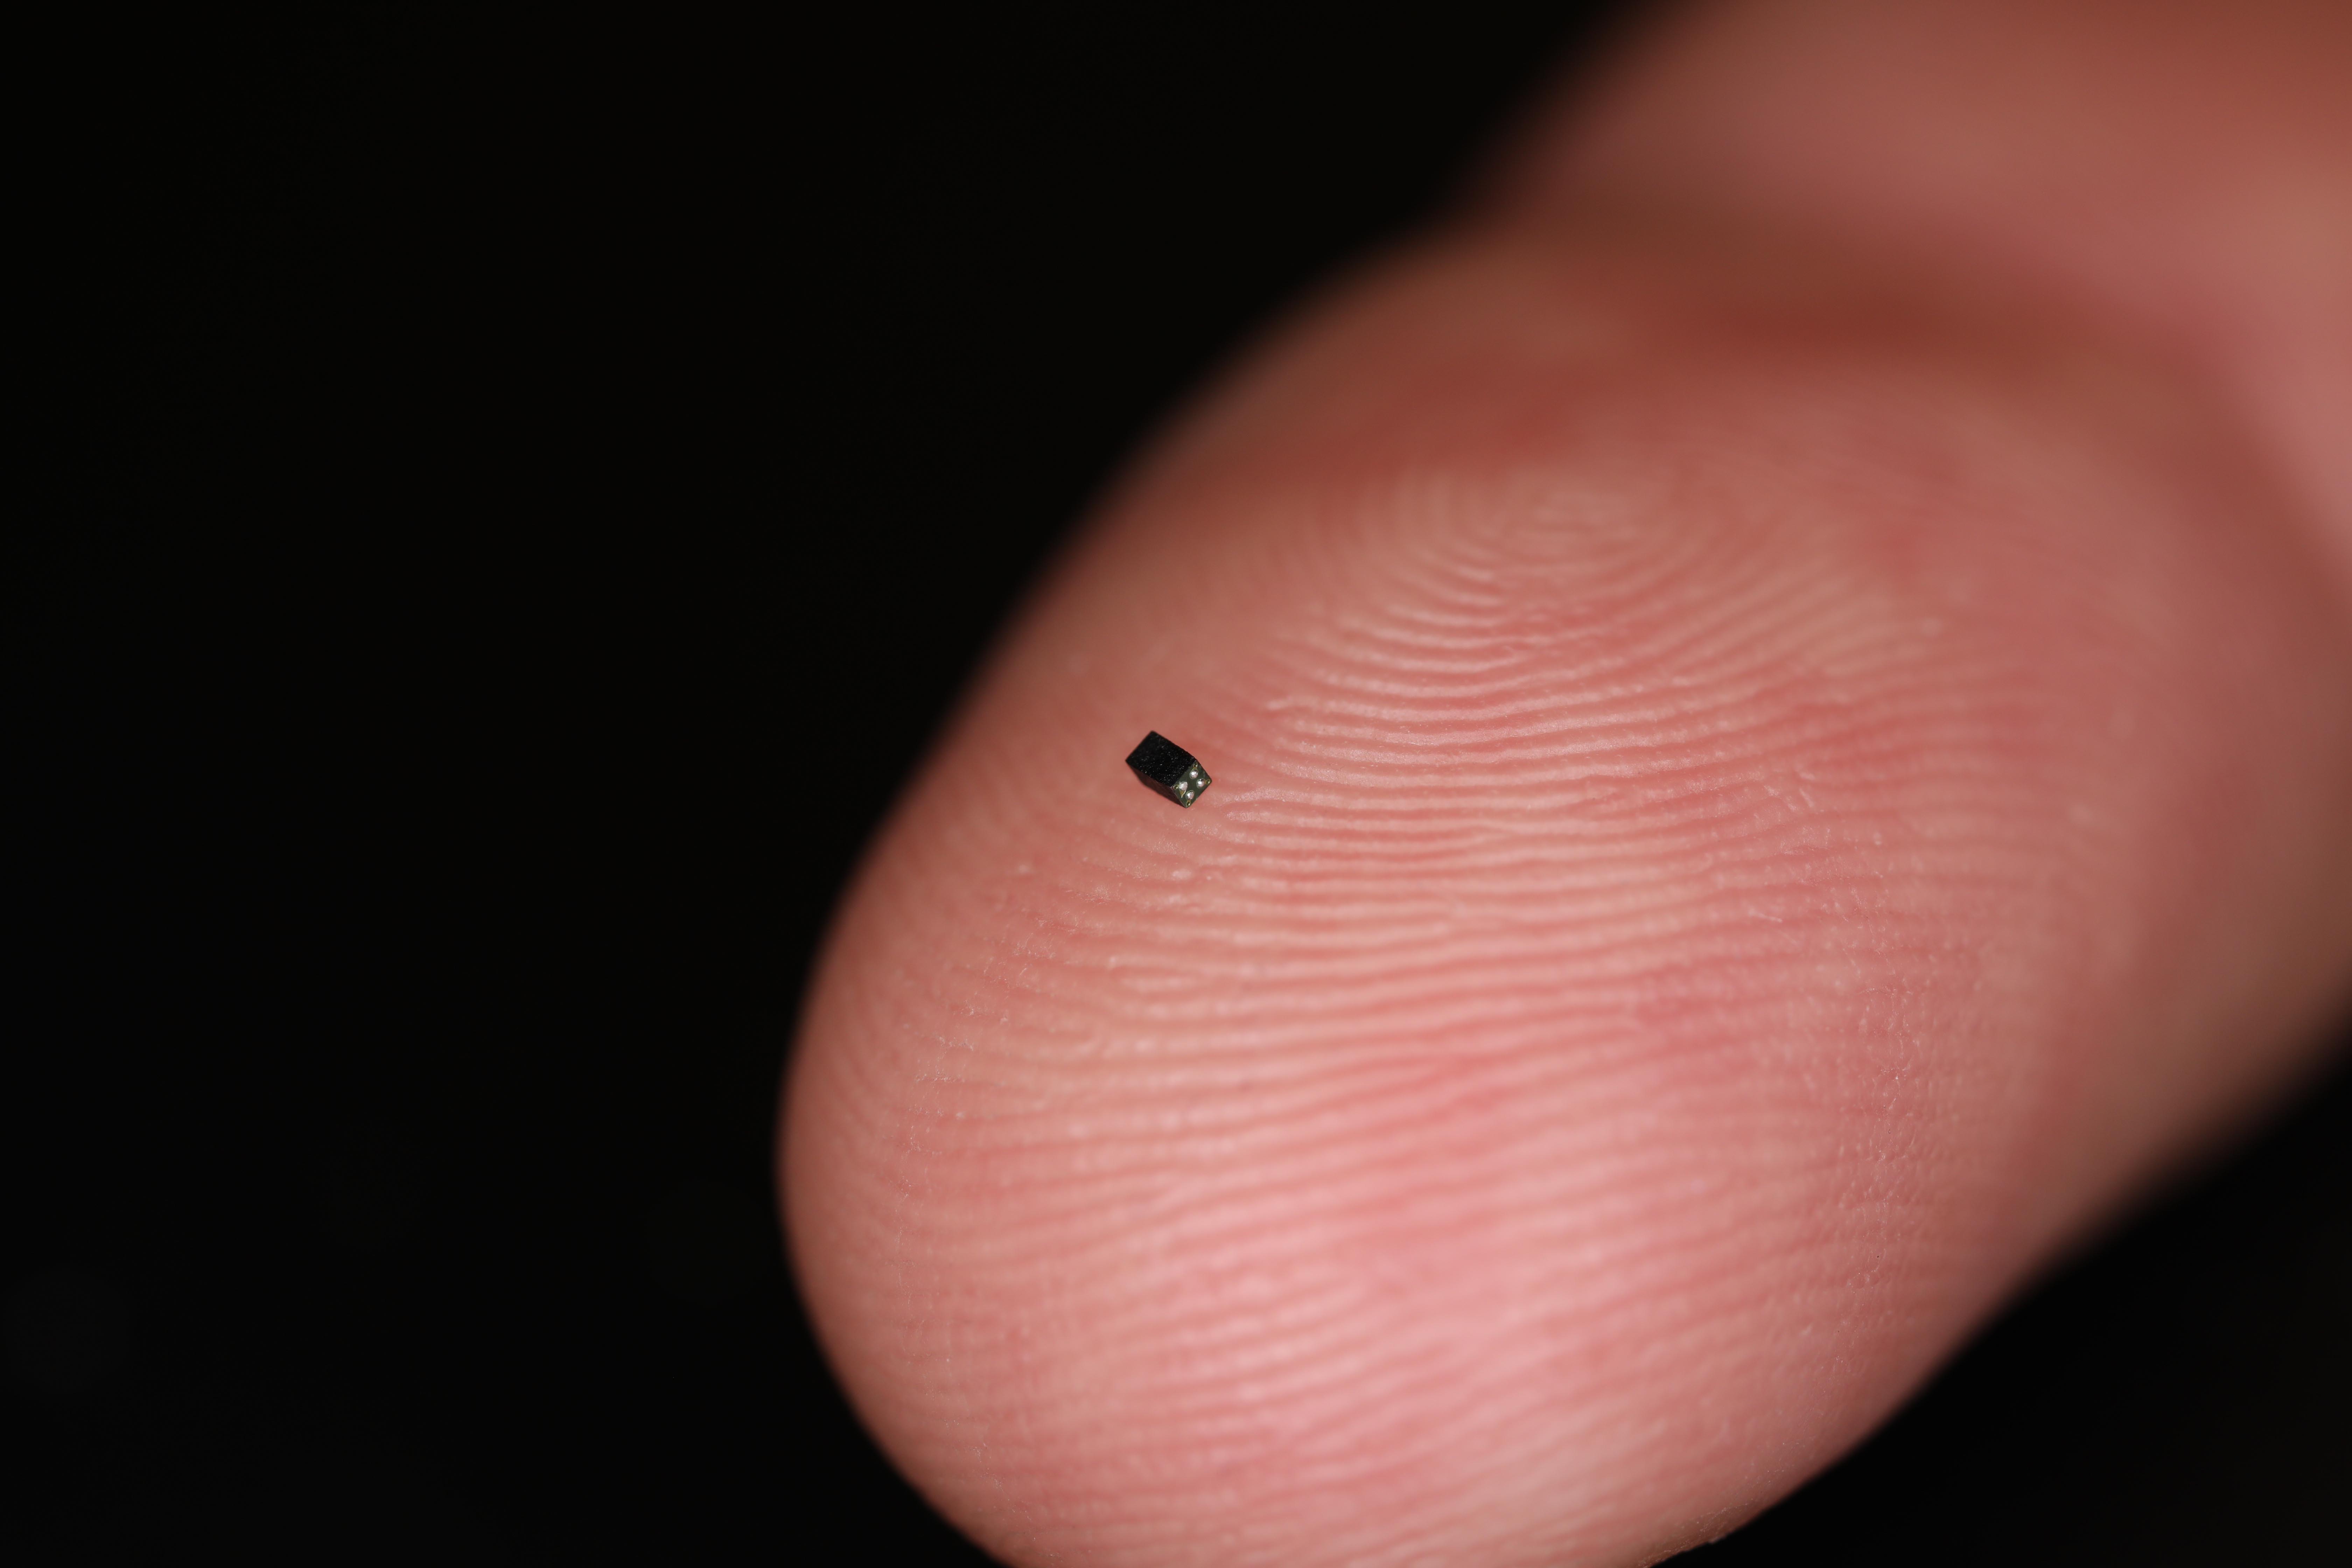 OmniVision sets Guinness world record for the smallest commercially available image sensor